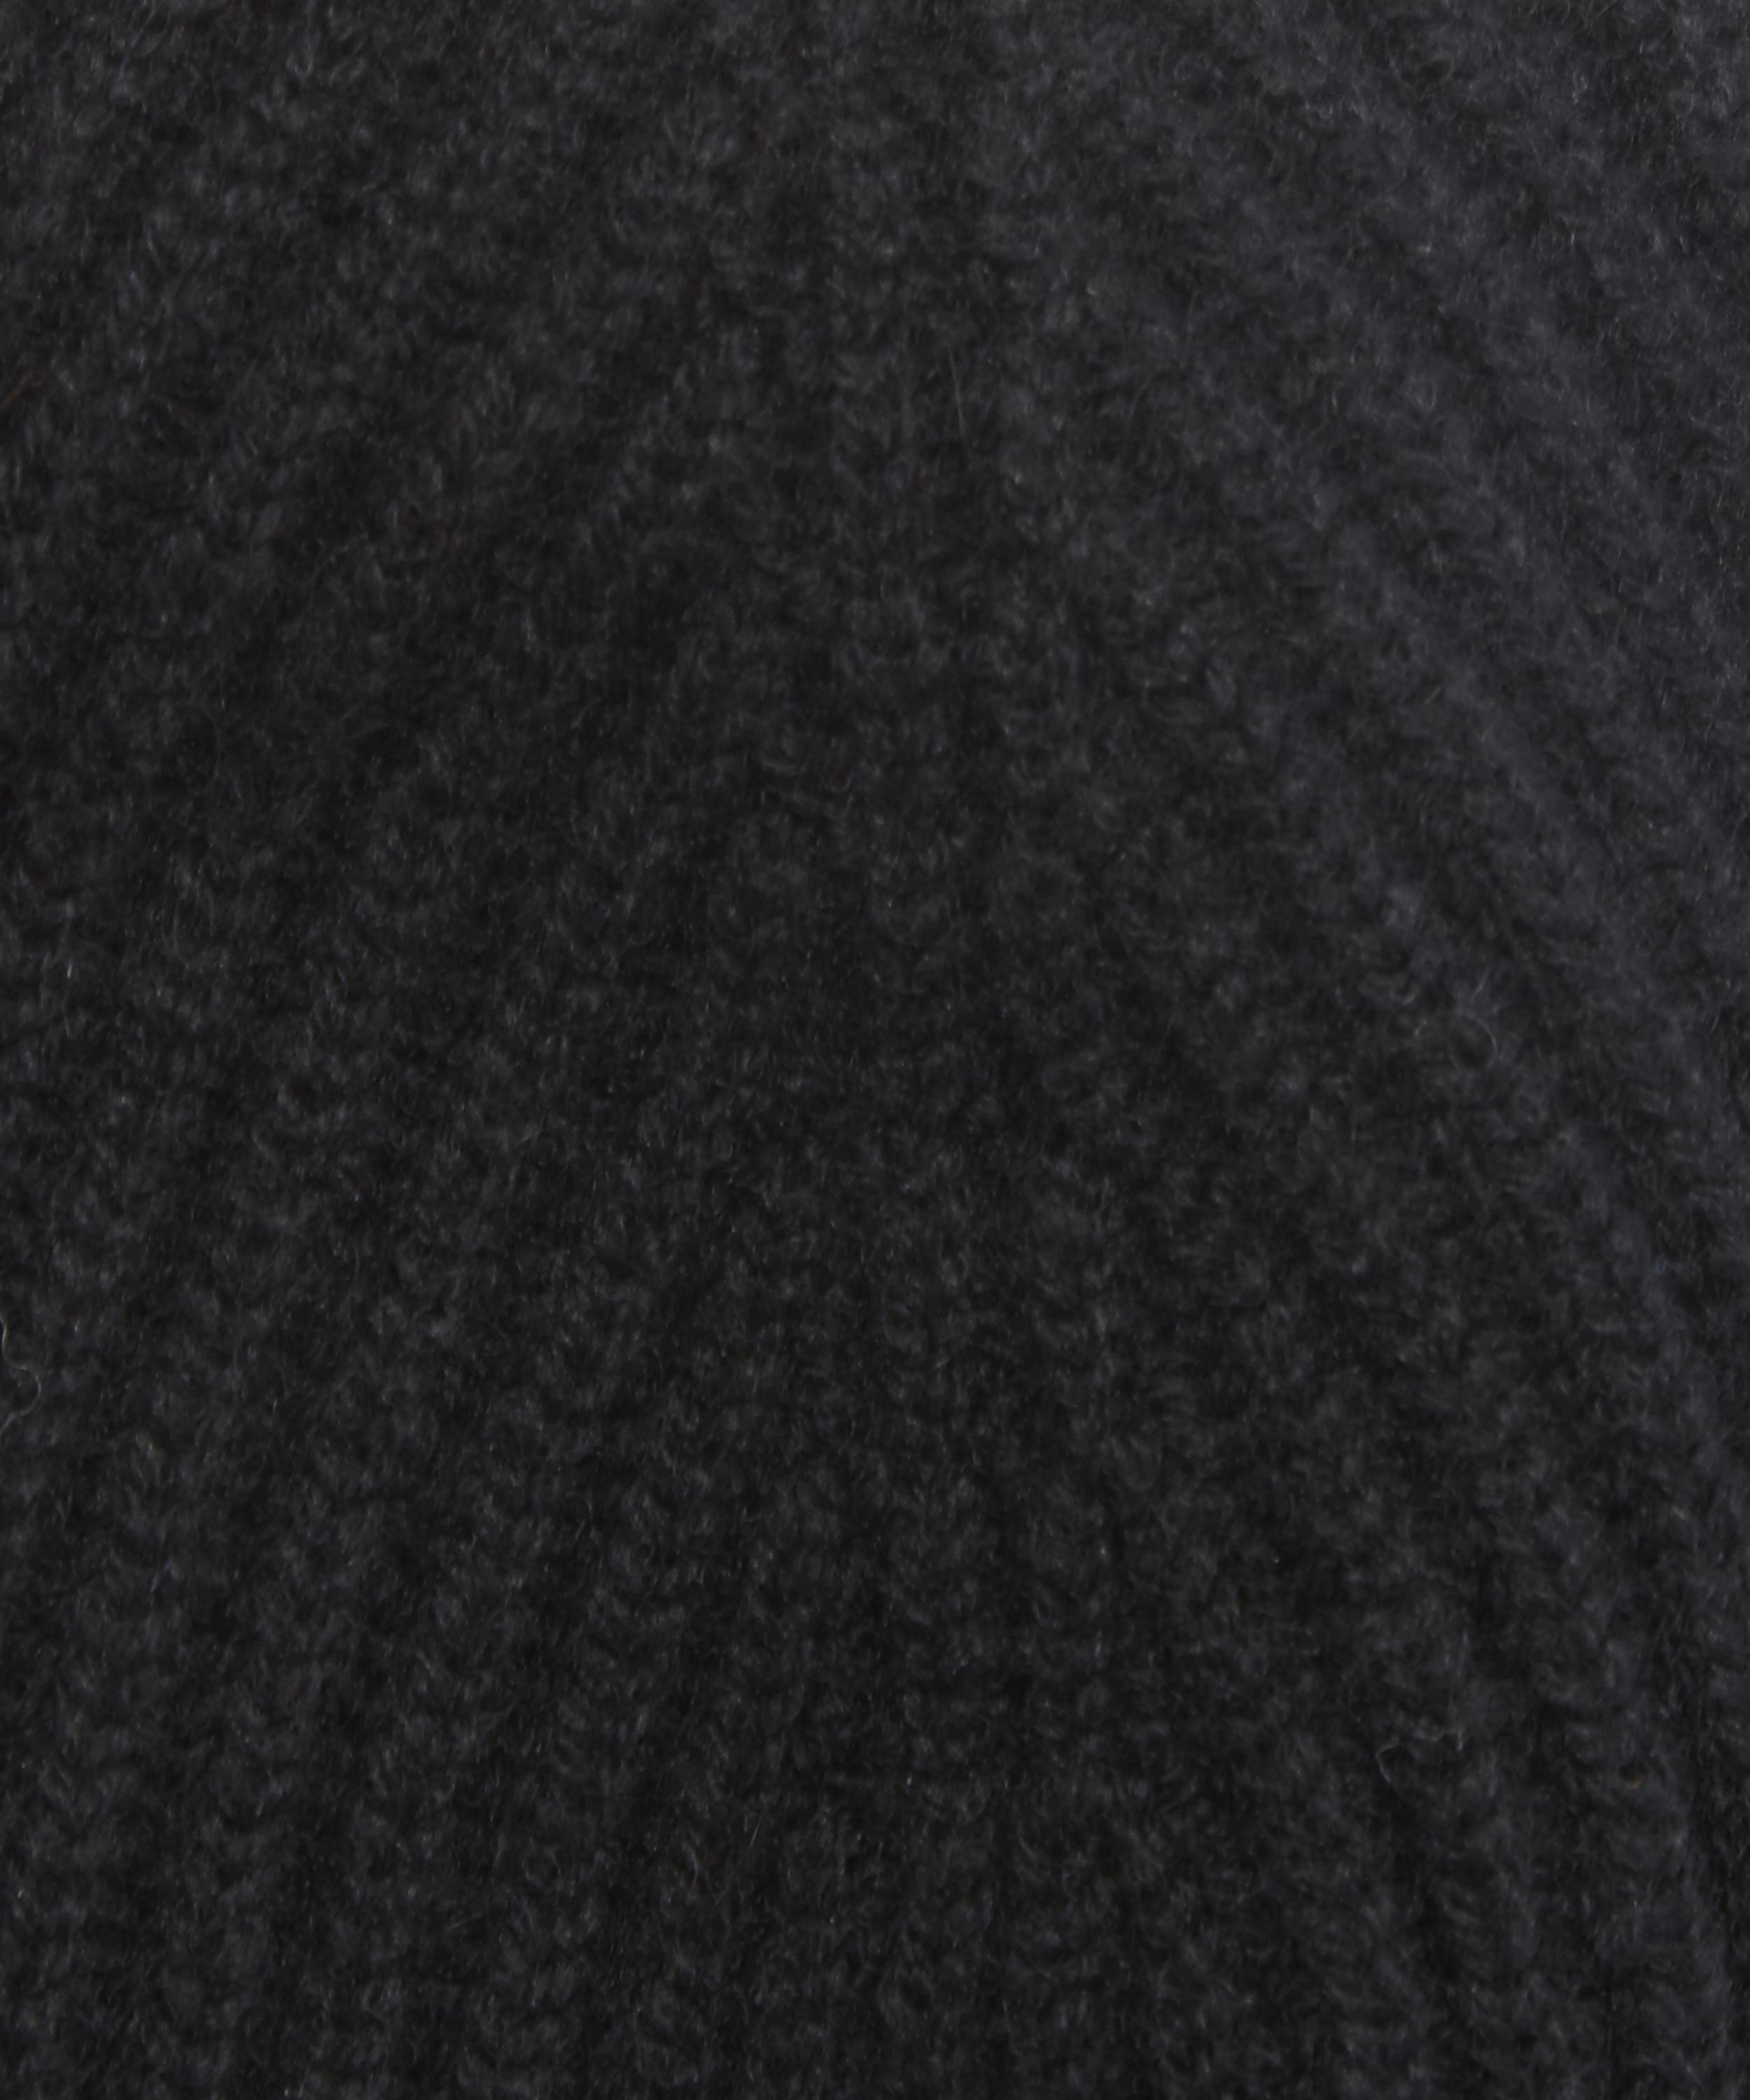 Cashmere Knitted Ribbed Beanie Hat | Liberty London